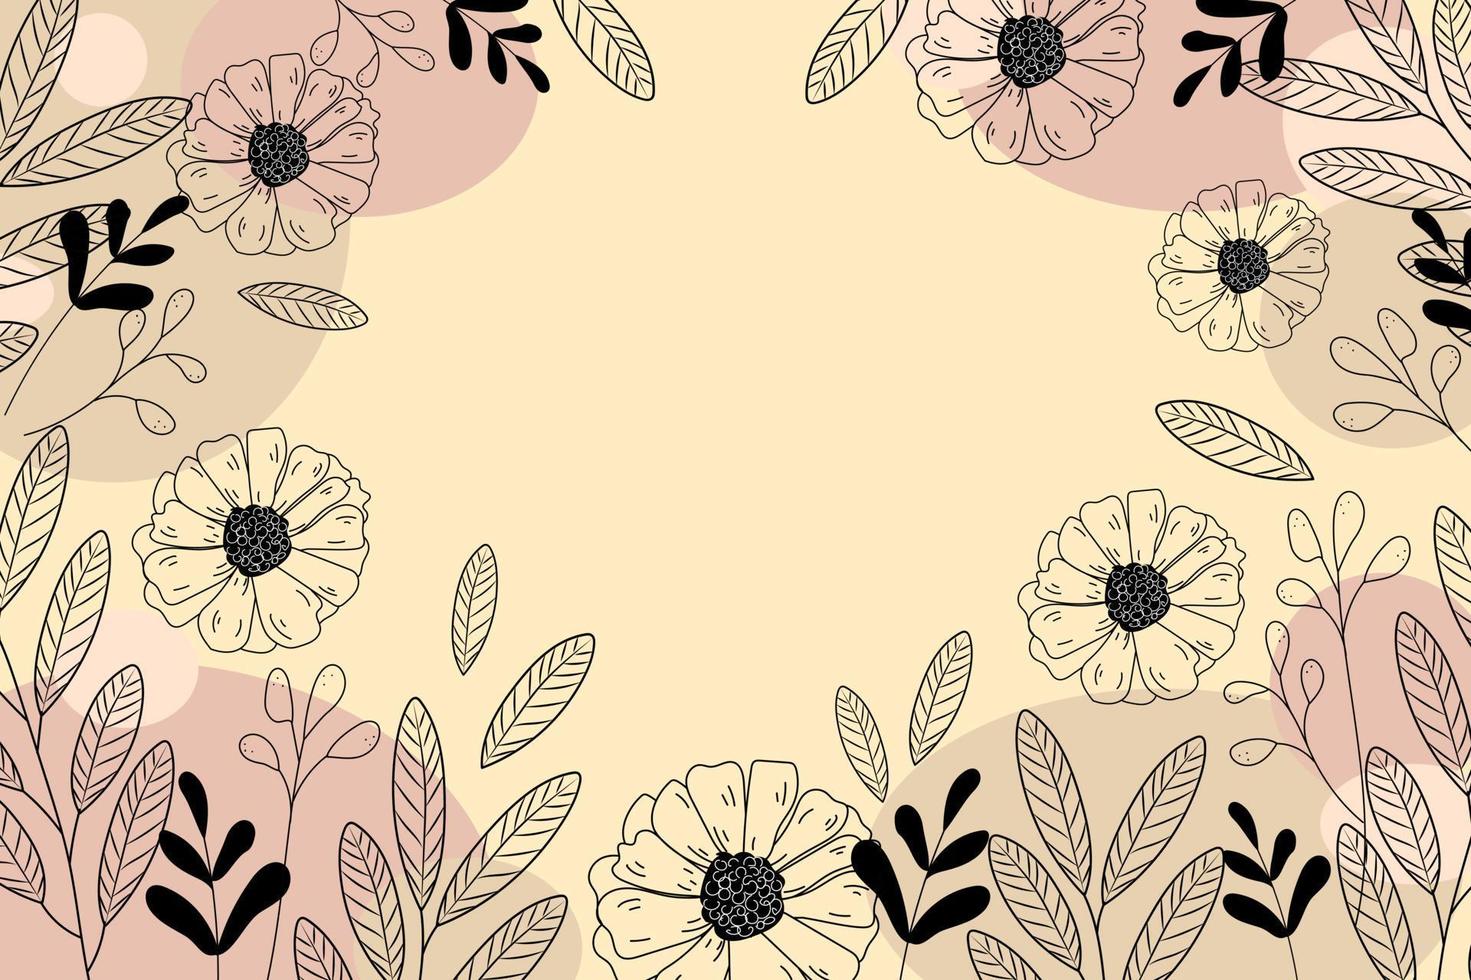 Horizontal banner with delicate warm colors and plants vector